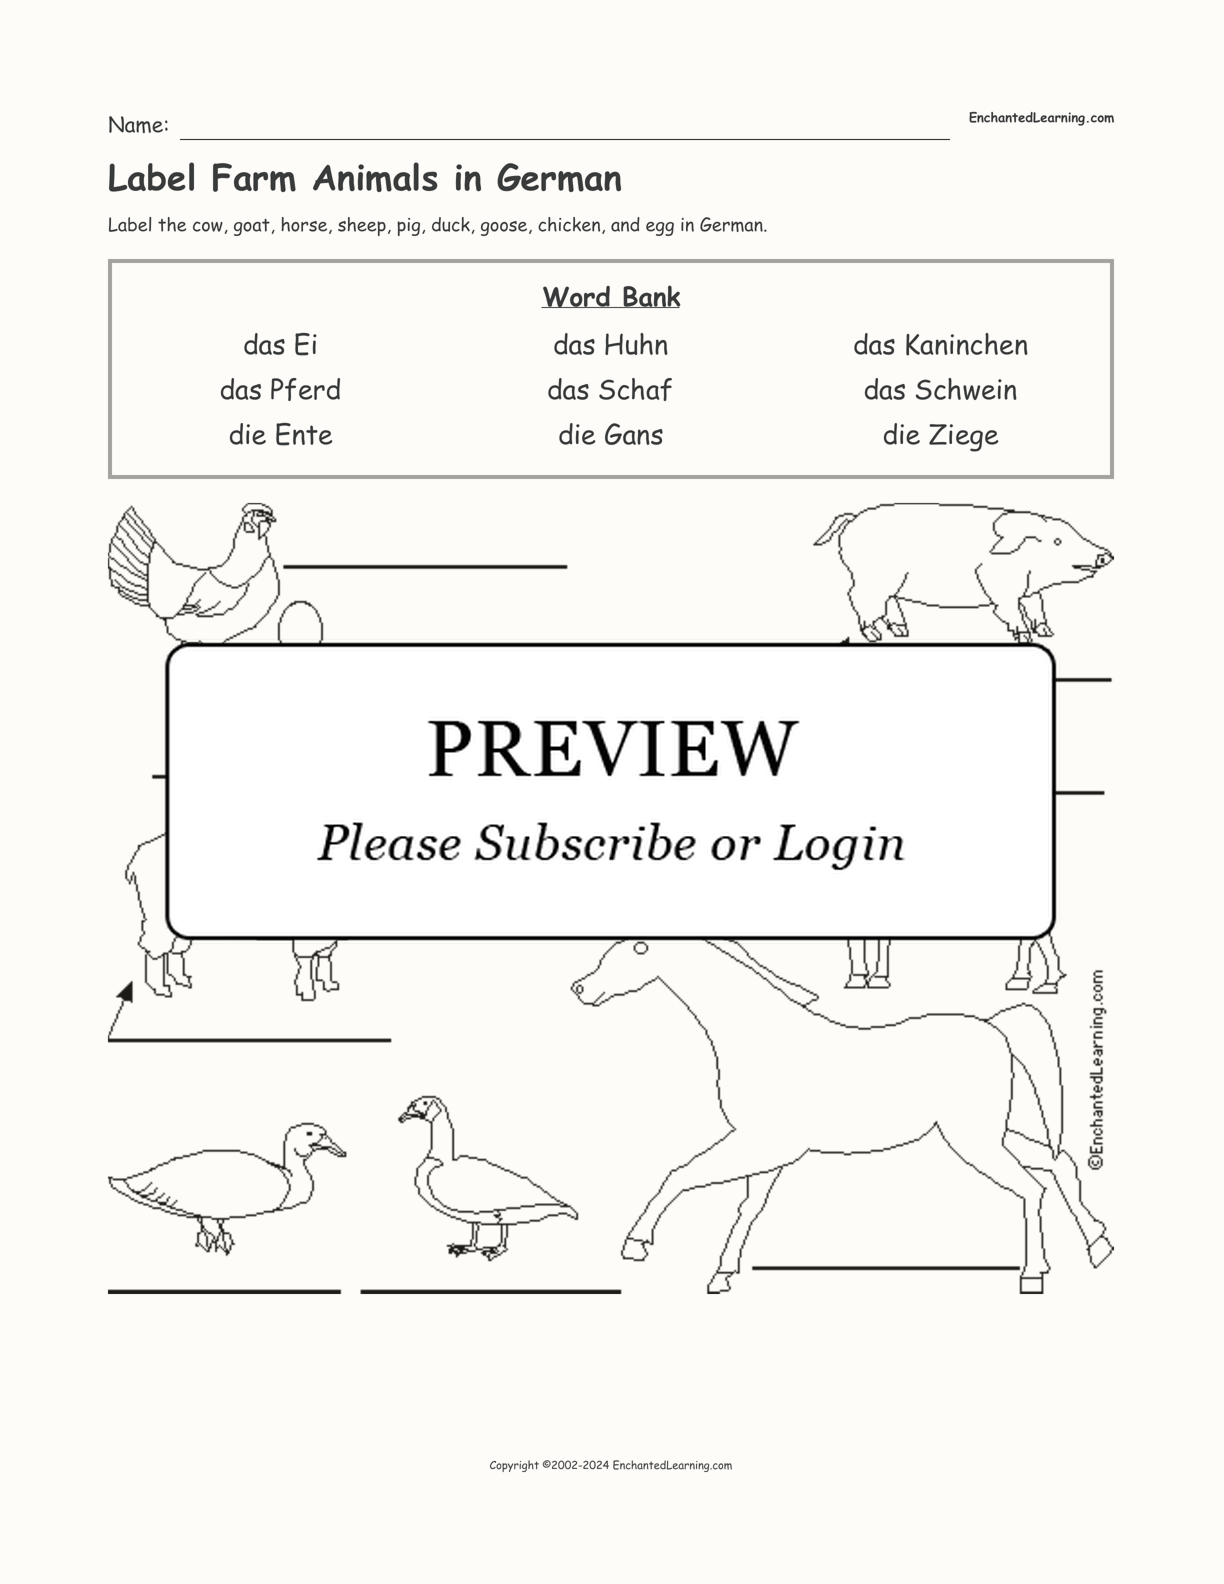 Label Farm Animals in German interactive worksheet page 1